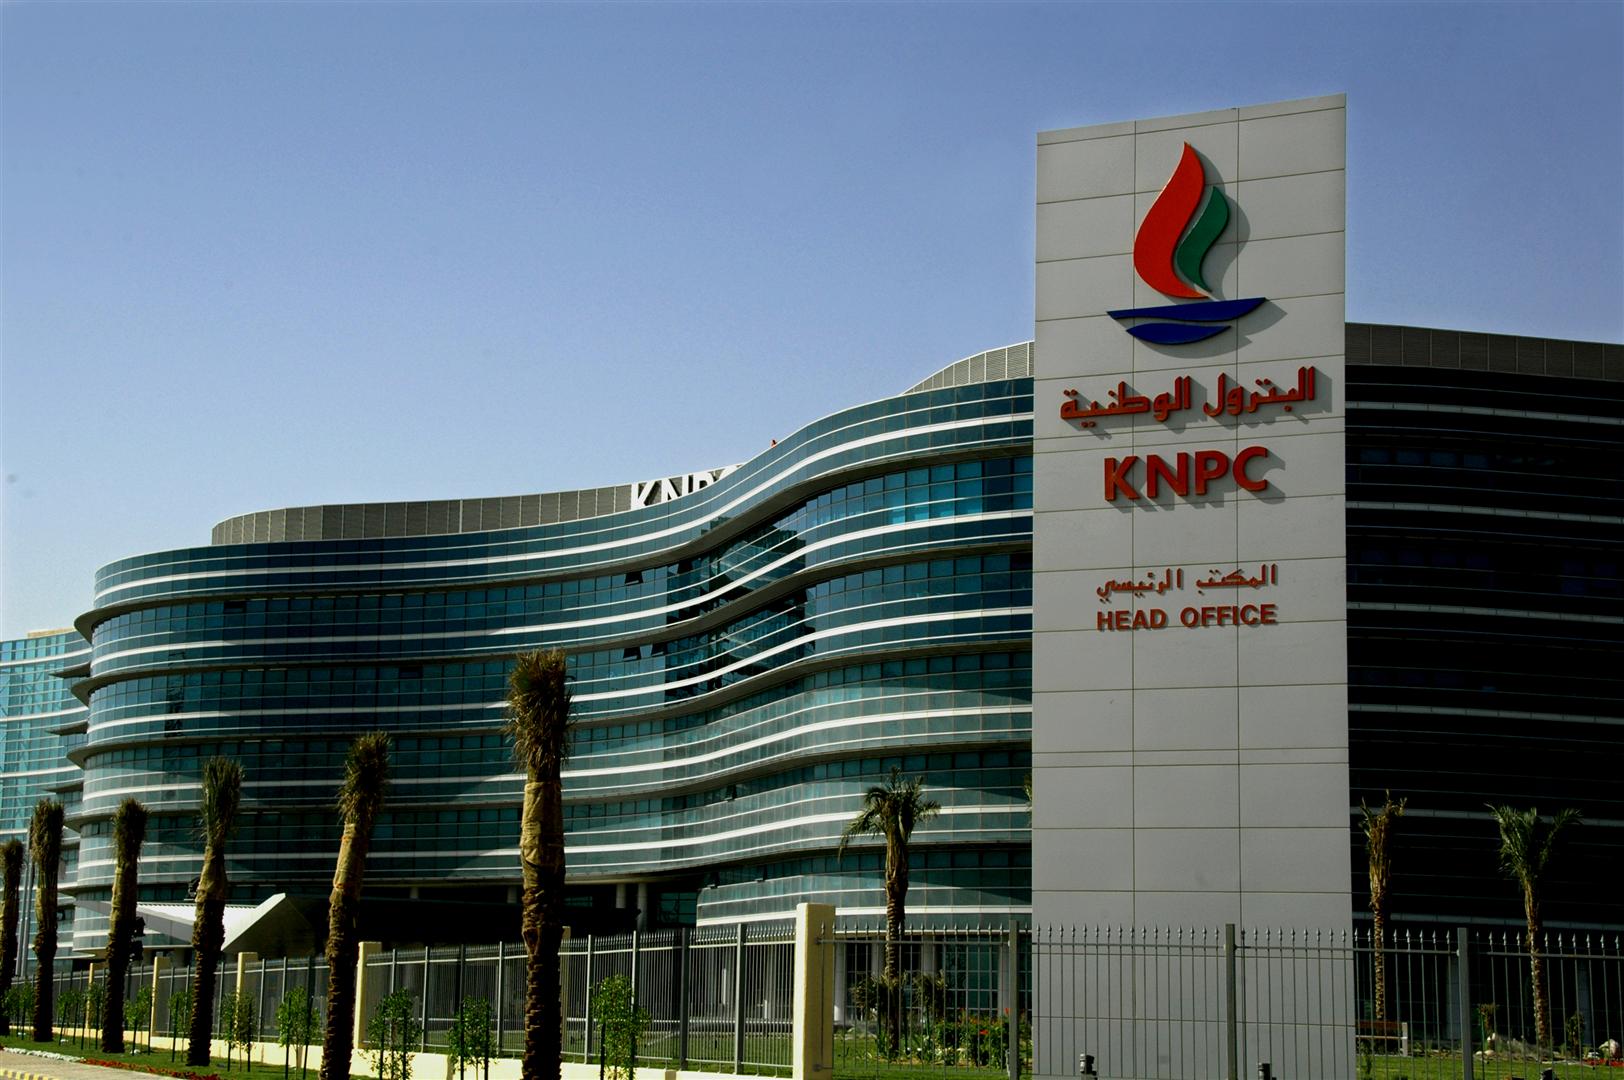 knpc head office: Guiding Kuwait's Oil and Gas Directory